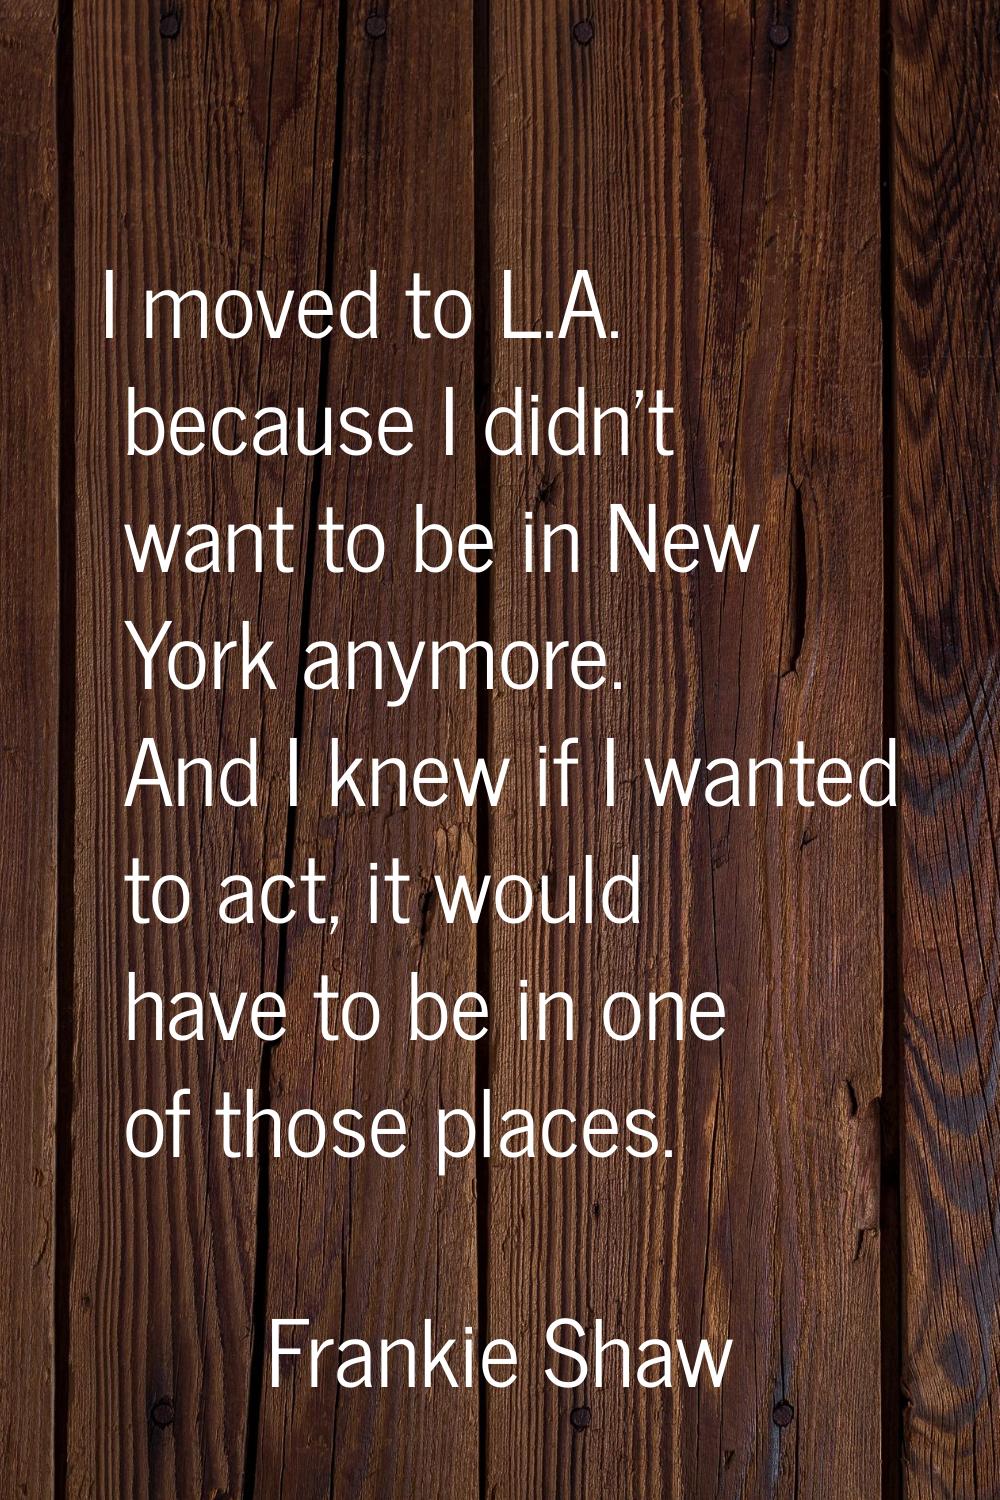 I moved to L.A. because I didn't want to be in New York anymore. And I knew if I wanted to act, it 